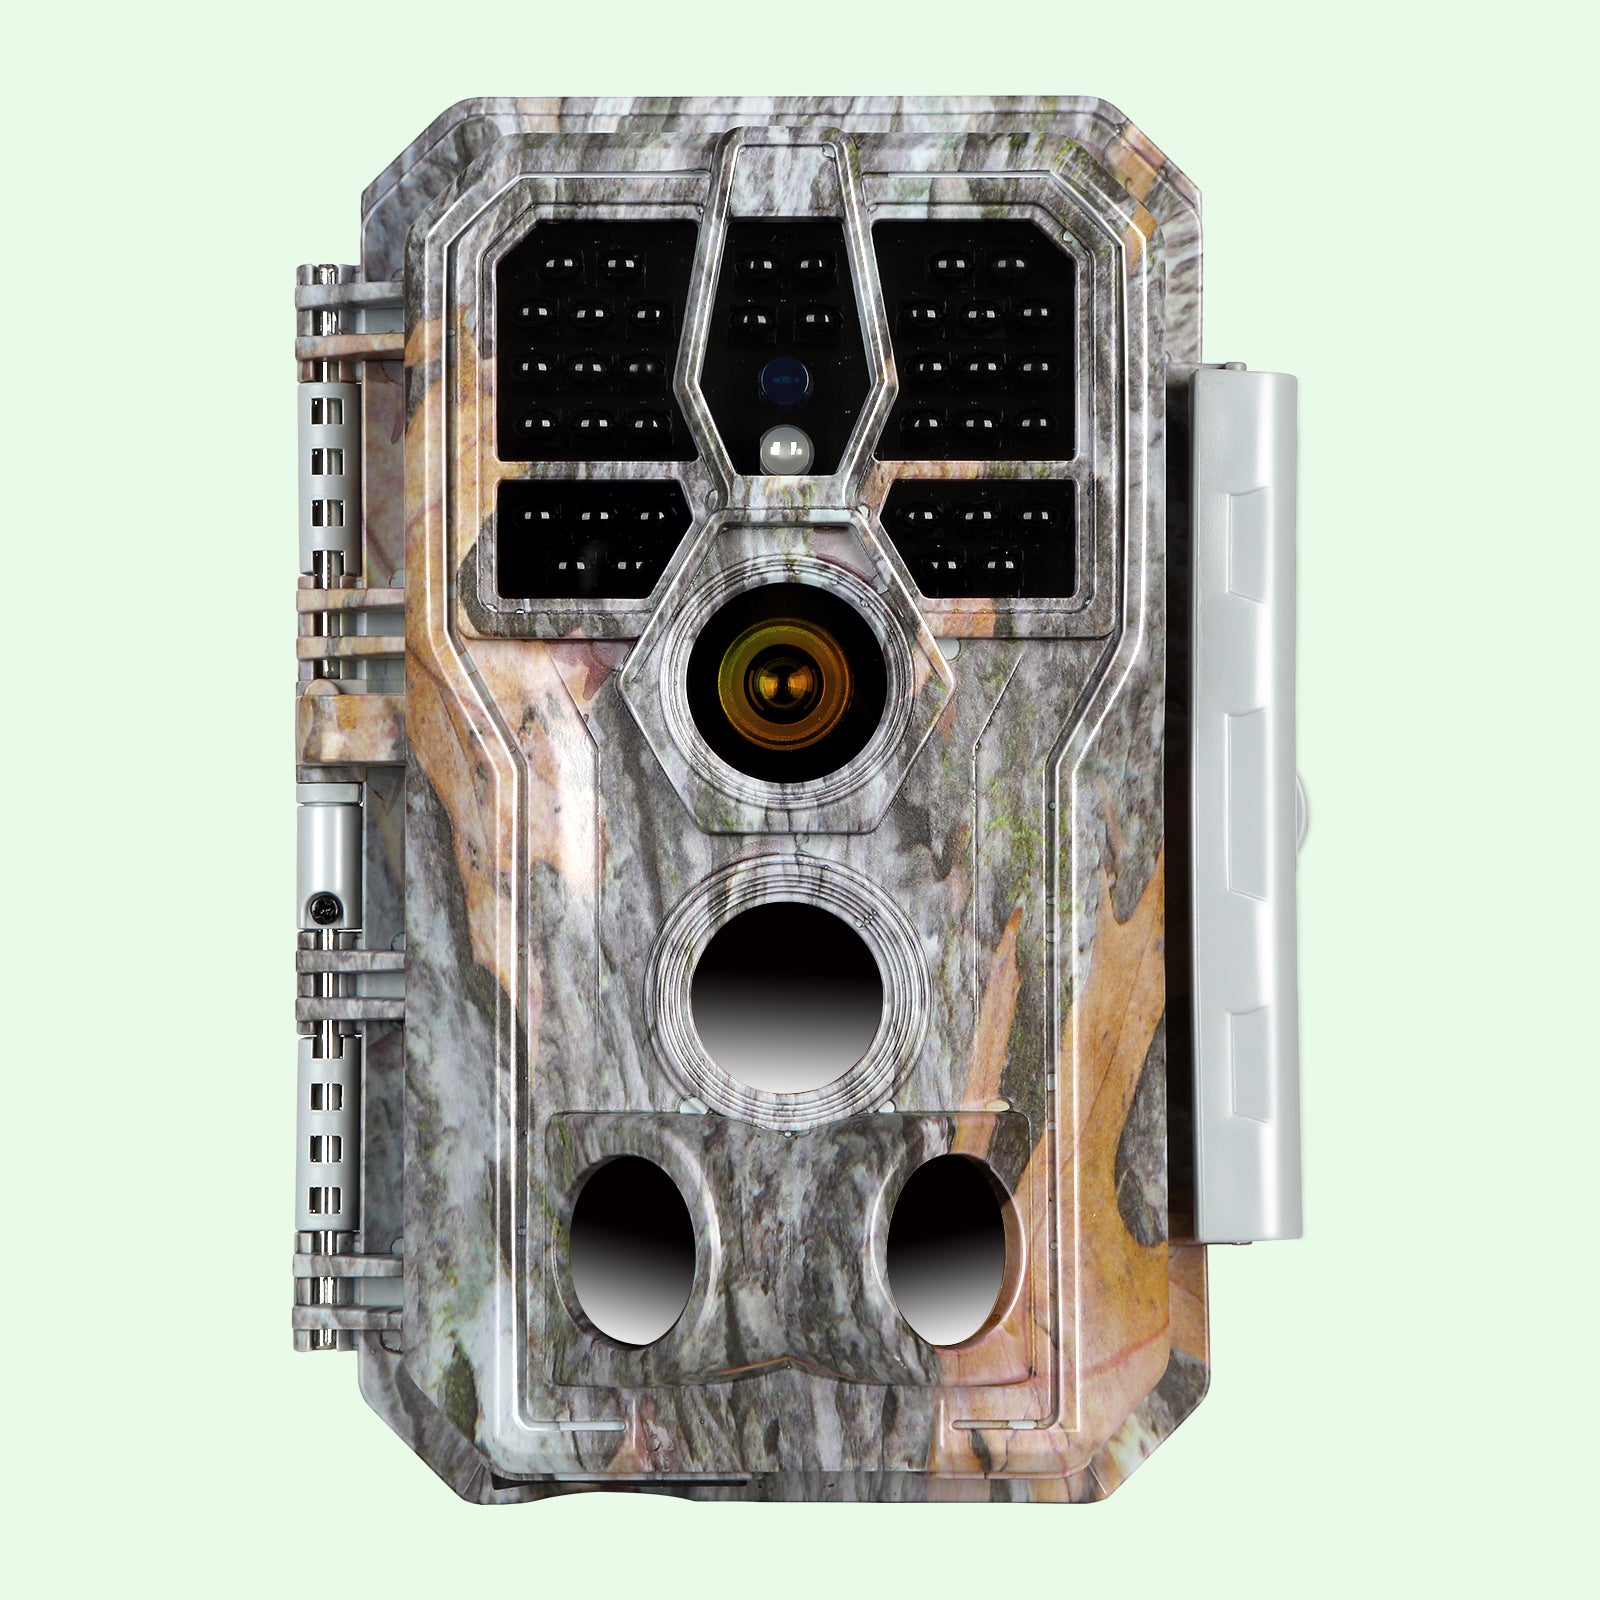 Wildlife Trail Camera with Night Vision Motion Activated 24MP 1296P Waterproof Stealth Camouflage for Hunting, Home Security 